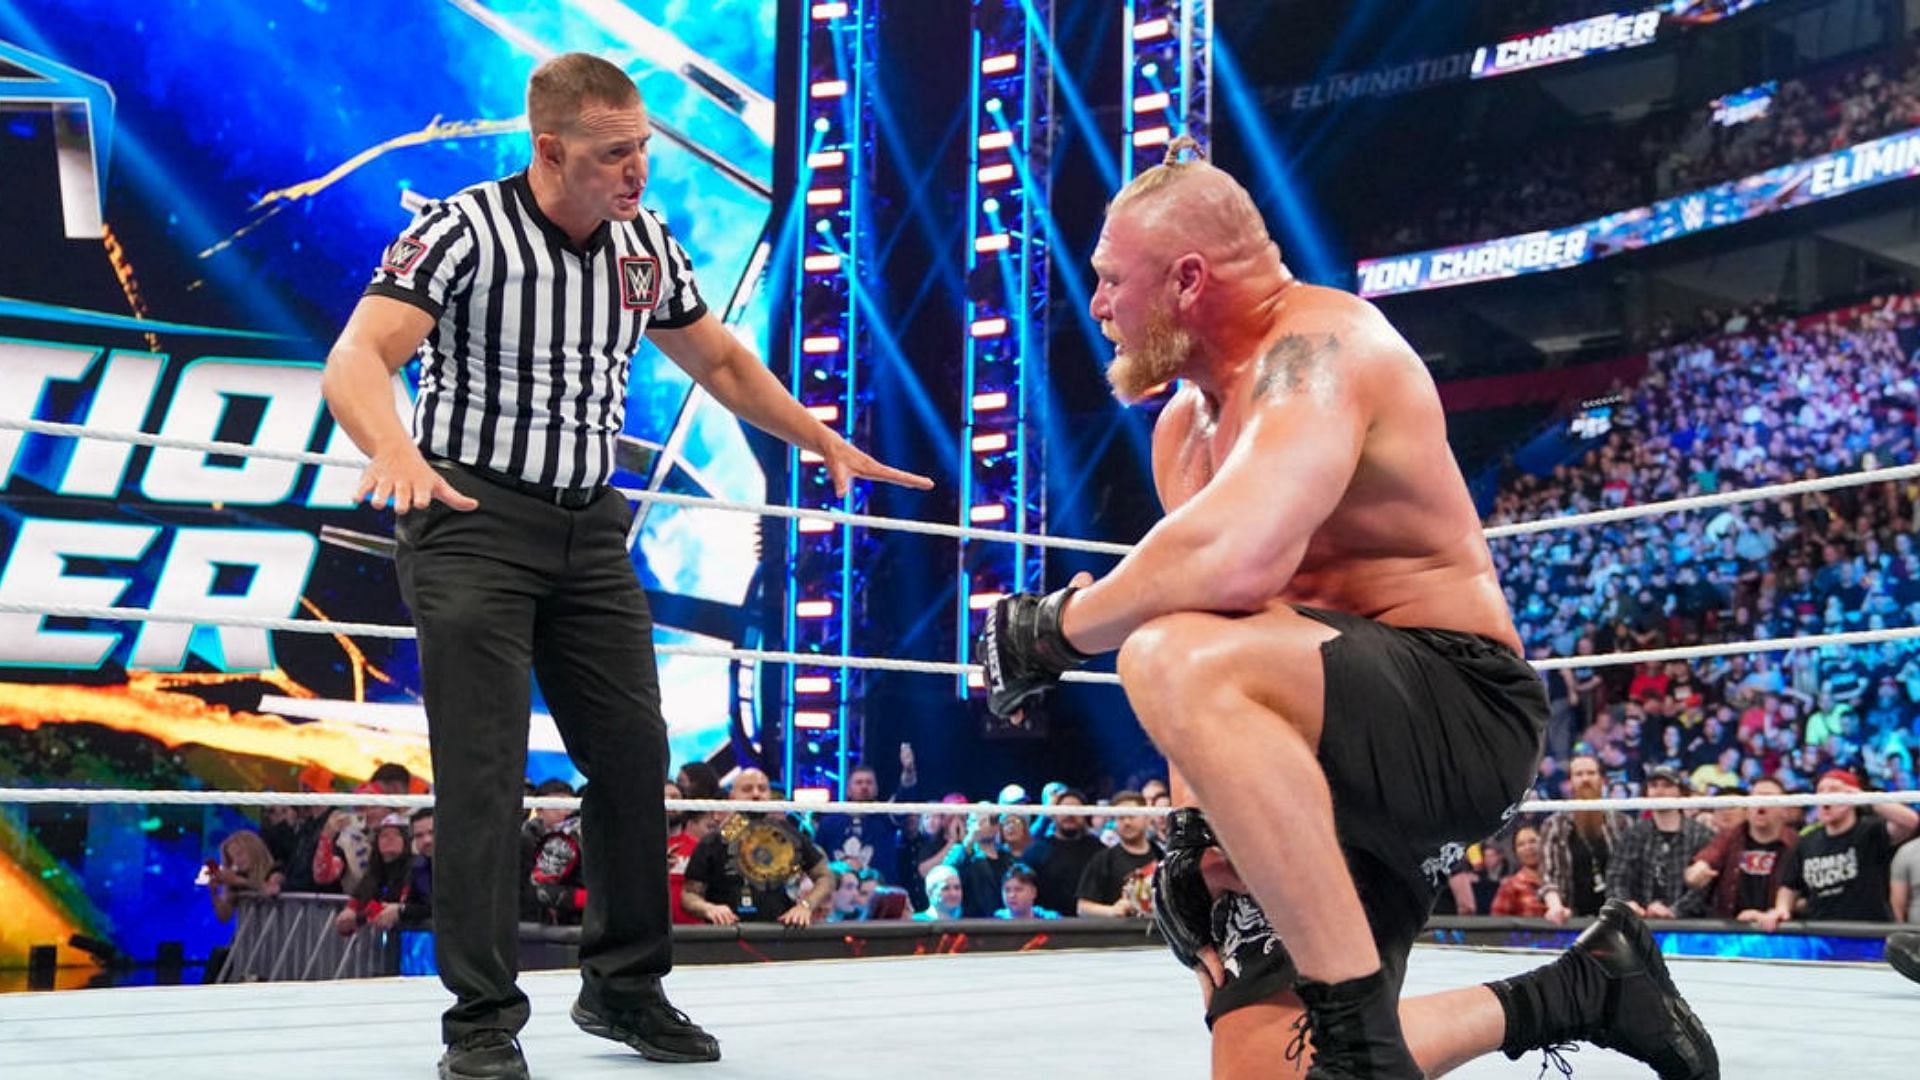 Brock Lesnar had an immediate reaction when he saw what was happening